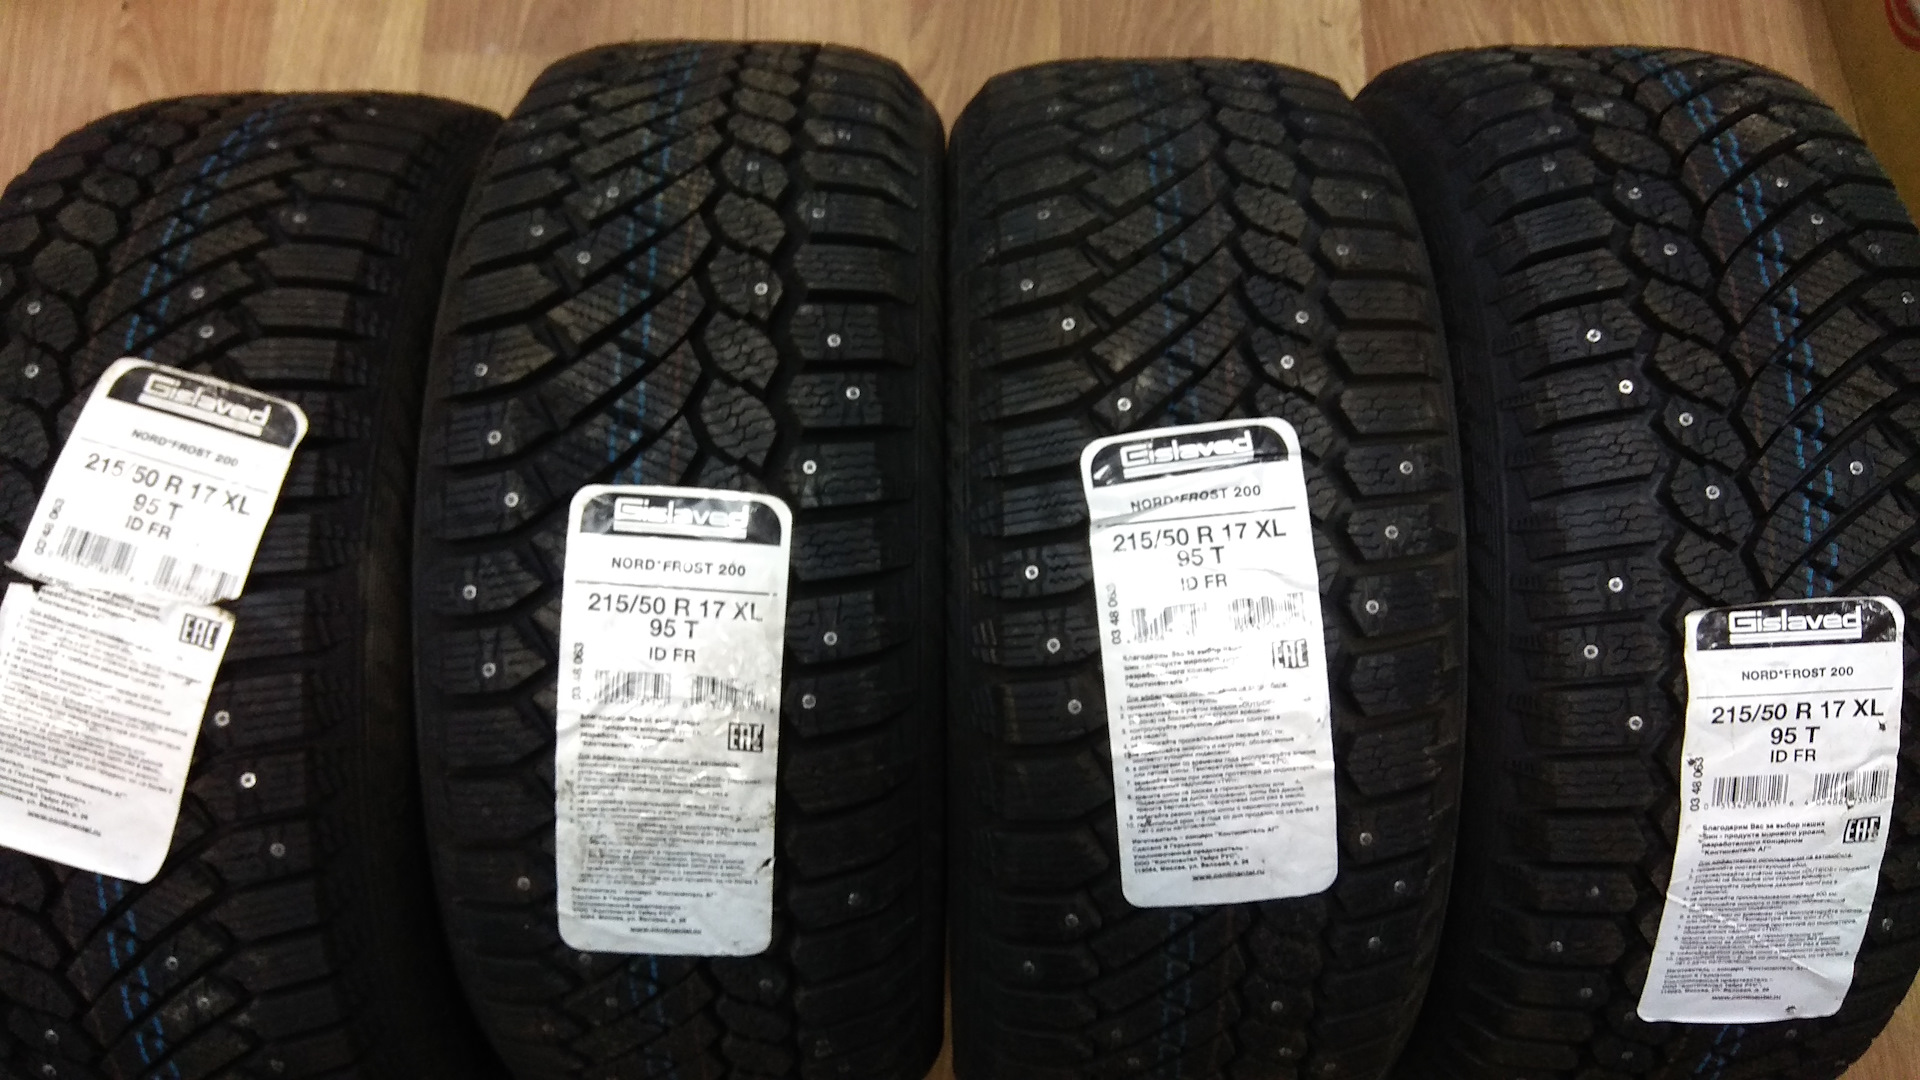 Nord Frost 200 205/50 r17